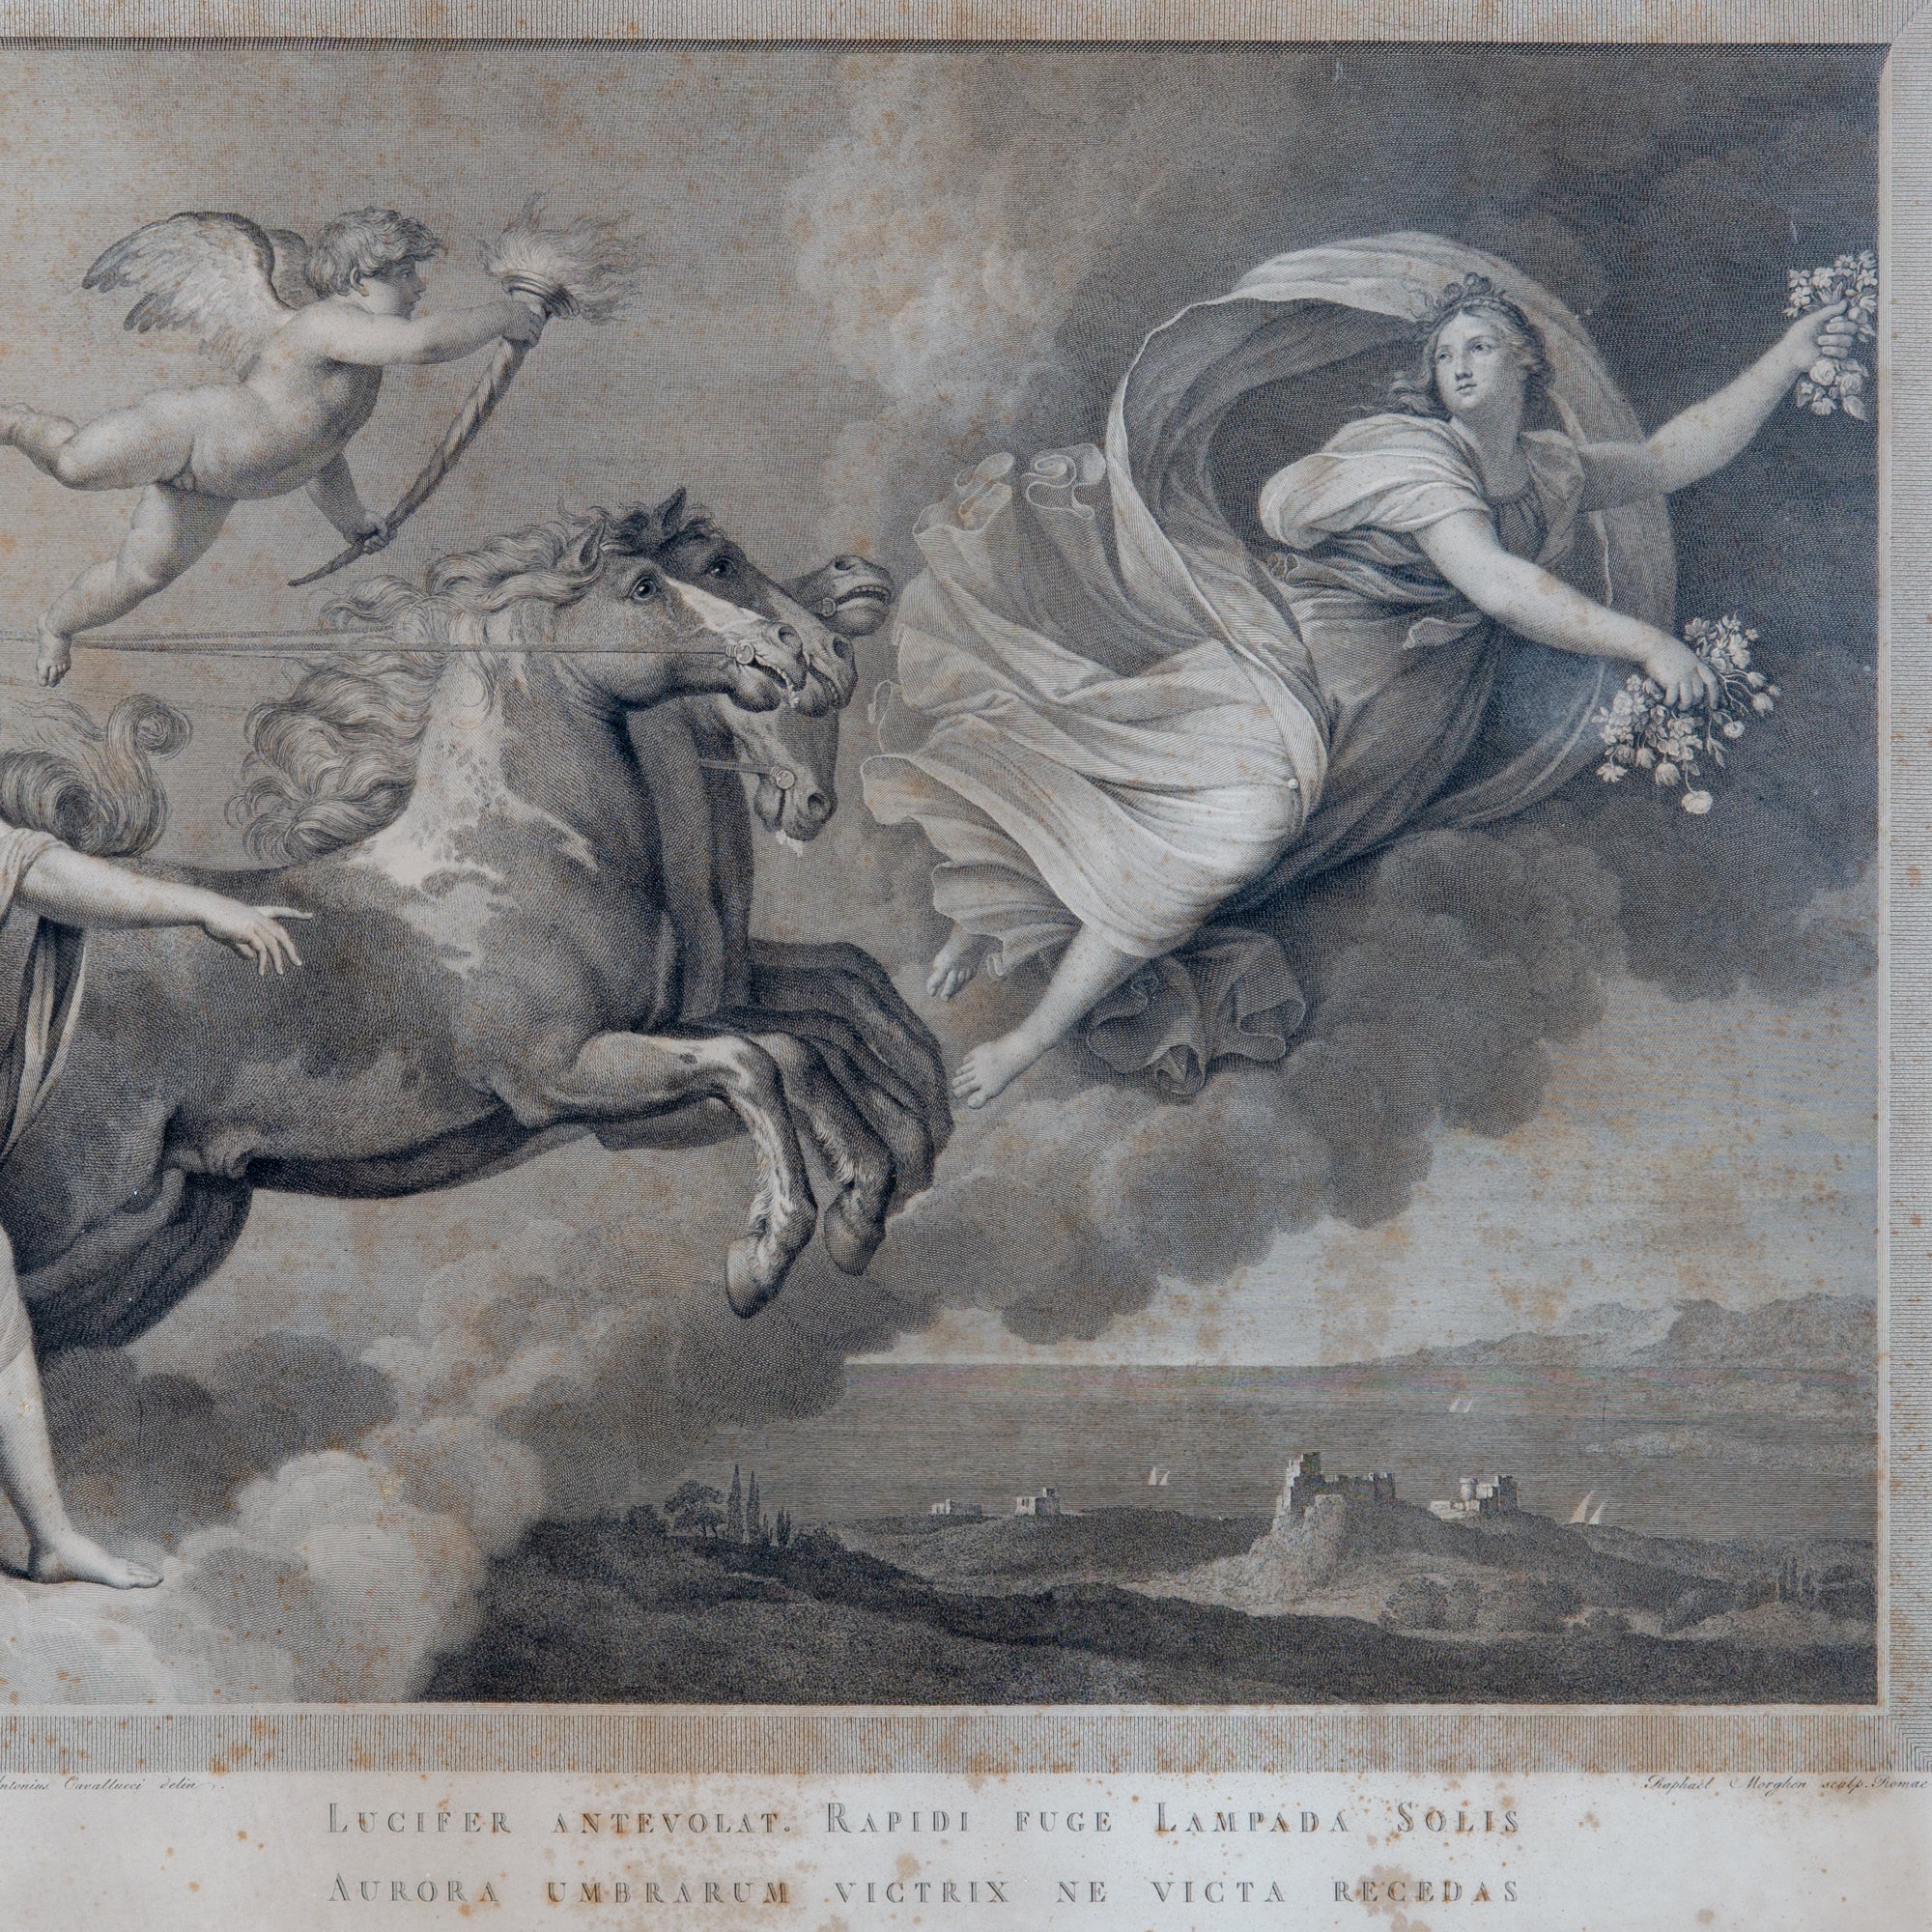 AURORA Engraving after Guido Reni Fresco by R.S. Morghen, c.1787